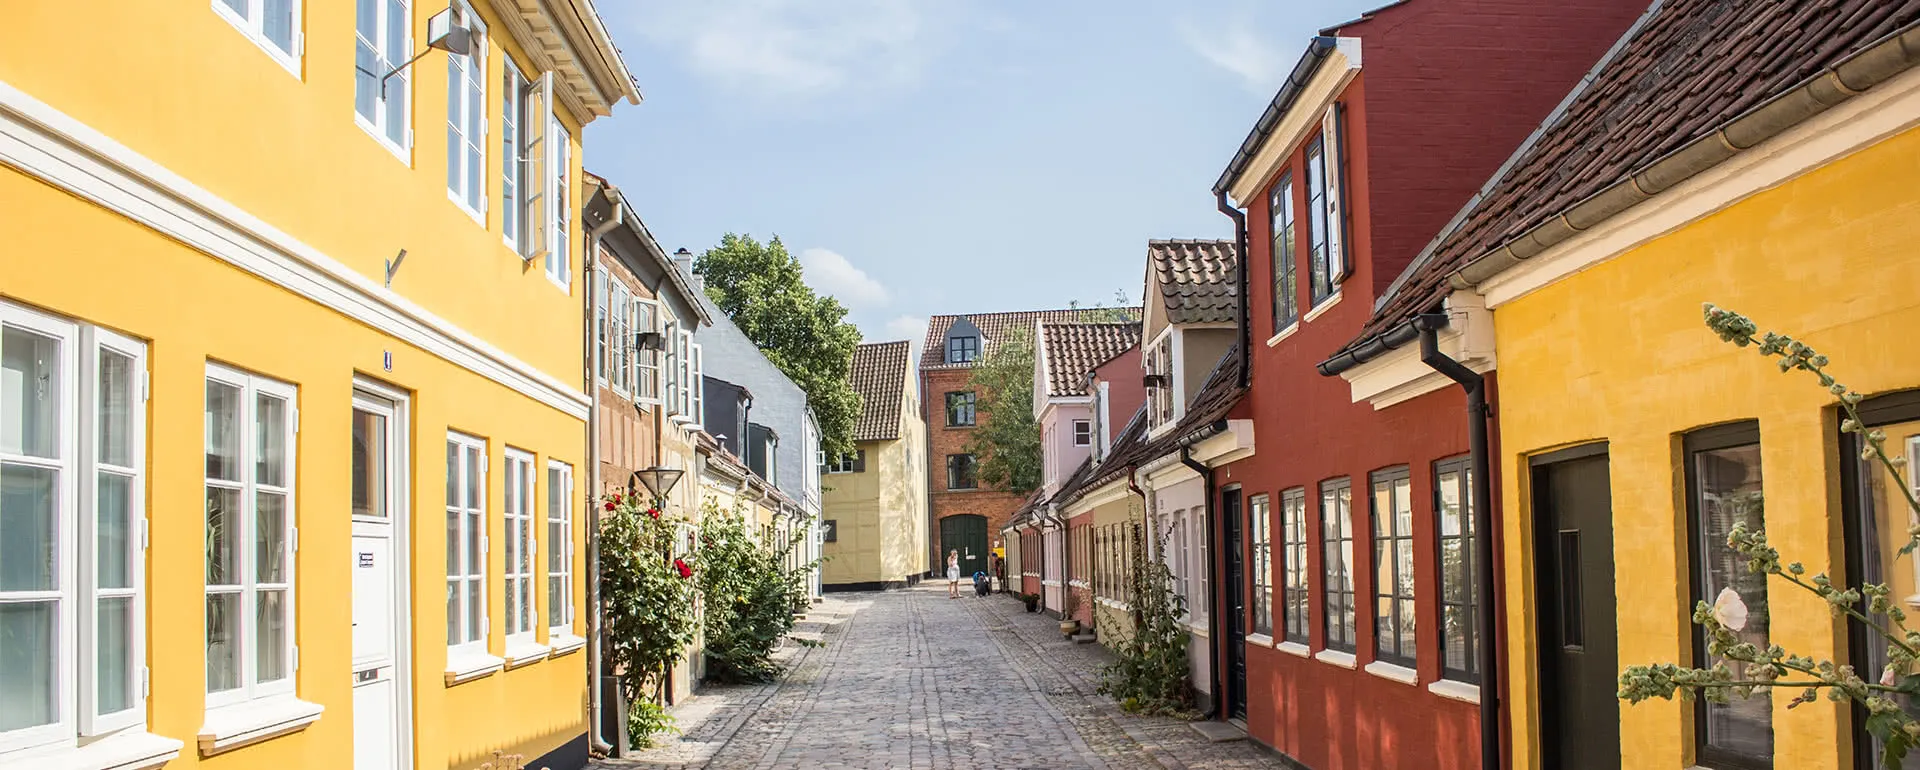 Odense - the destination with youth hostels